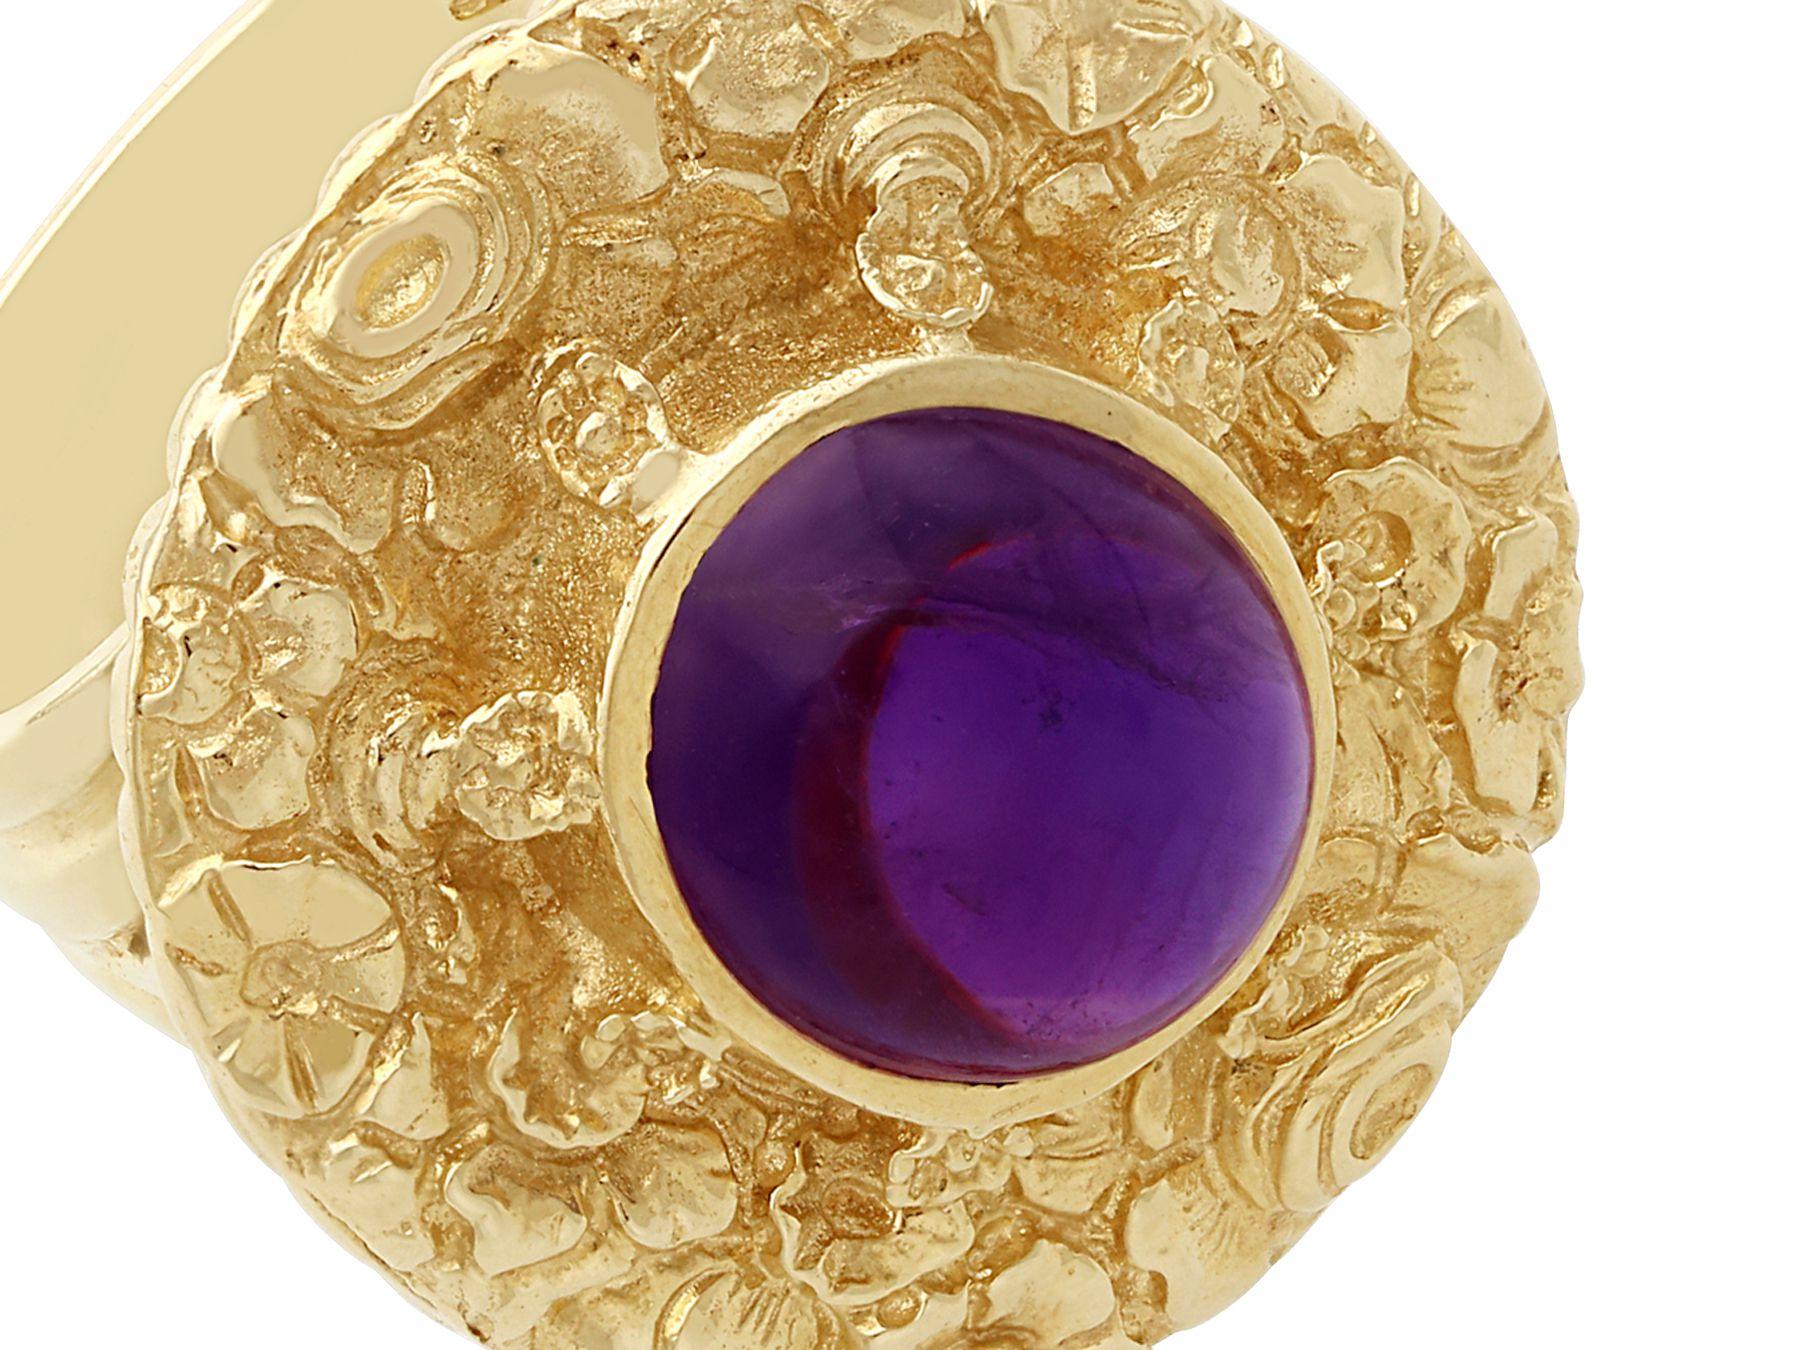 Retro Vintage 1970s 3.77 Carat Amethyst and Yellow Gold Cocktail Ring For Sale